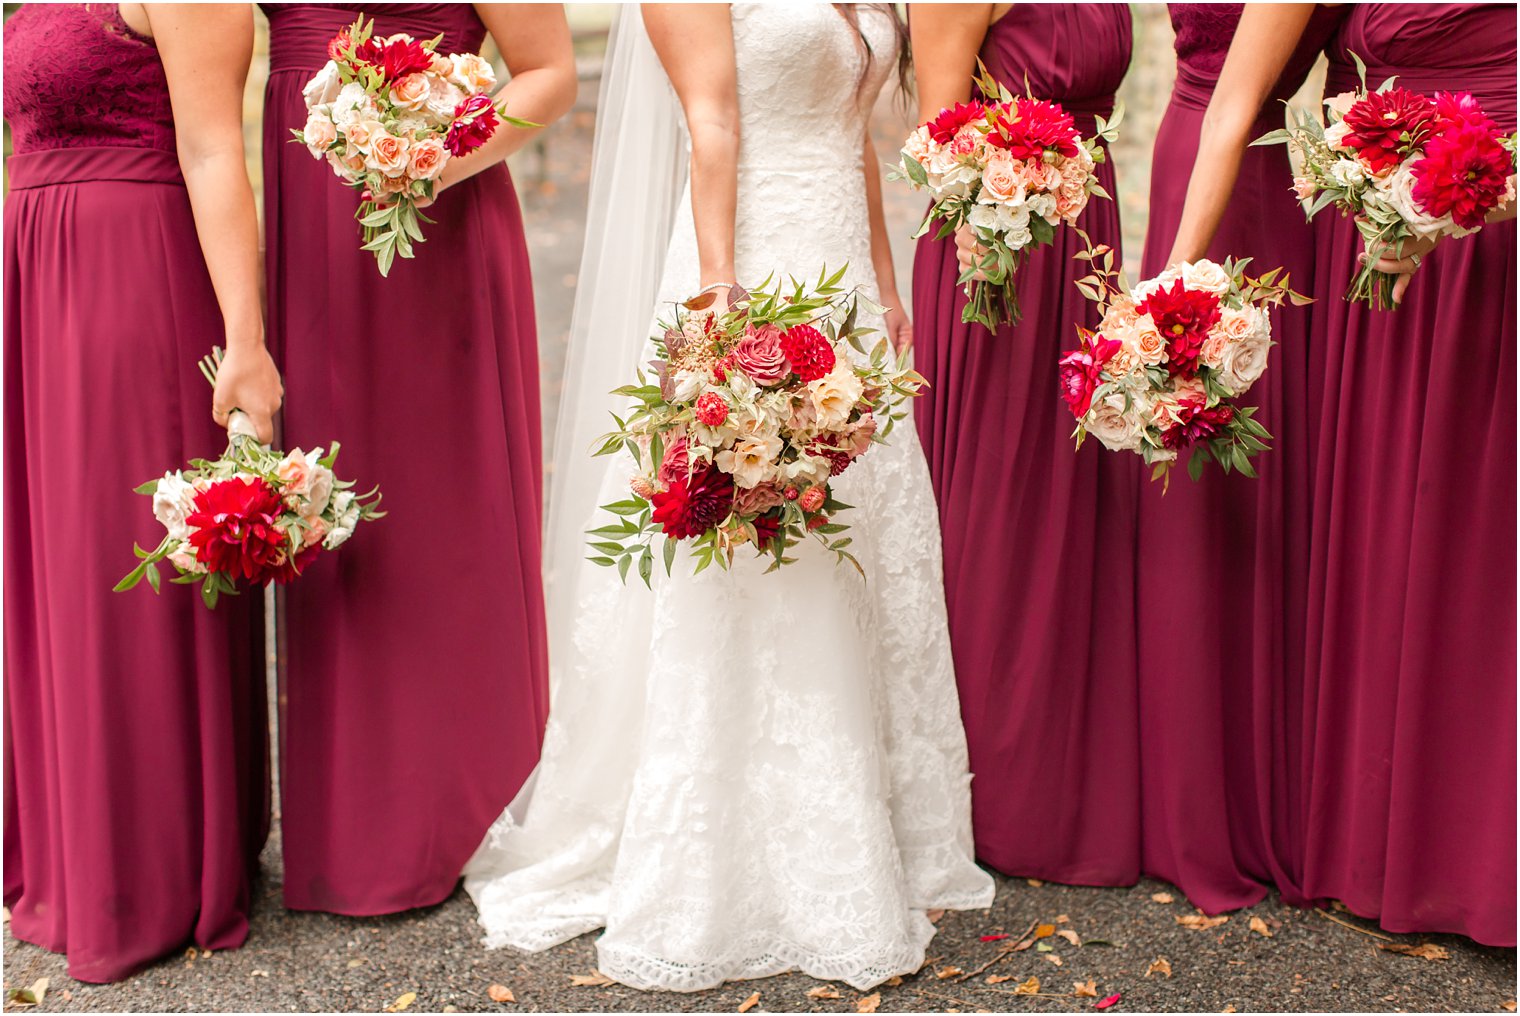 blush and burgundy wedding bouquets by Blue Jasmine Design photographed at Olde Mill Inn by Idalia Photography